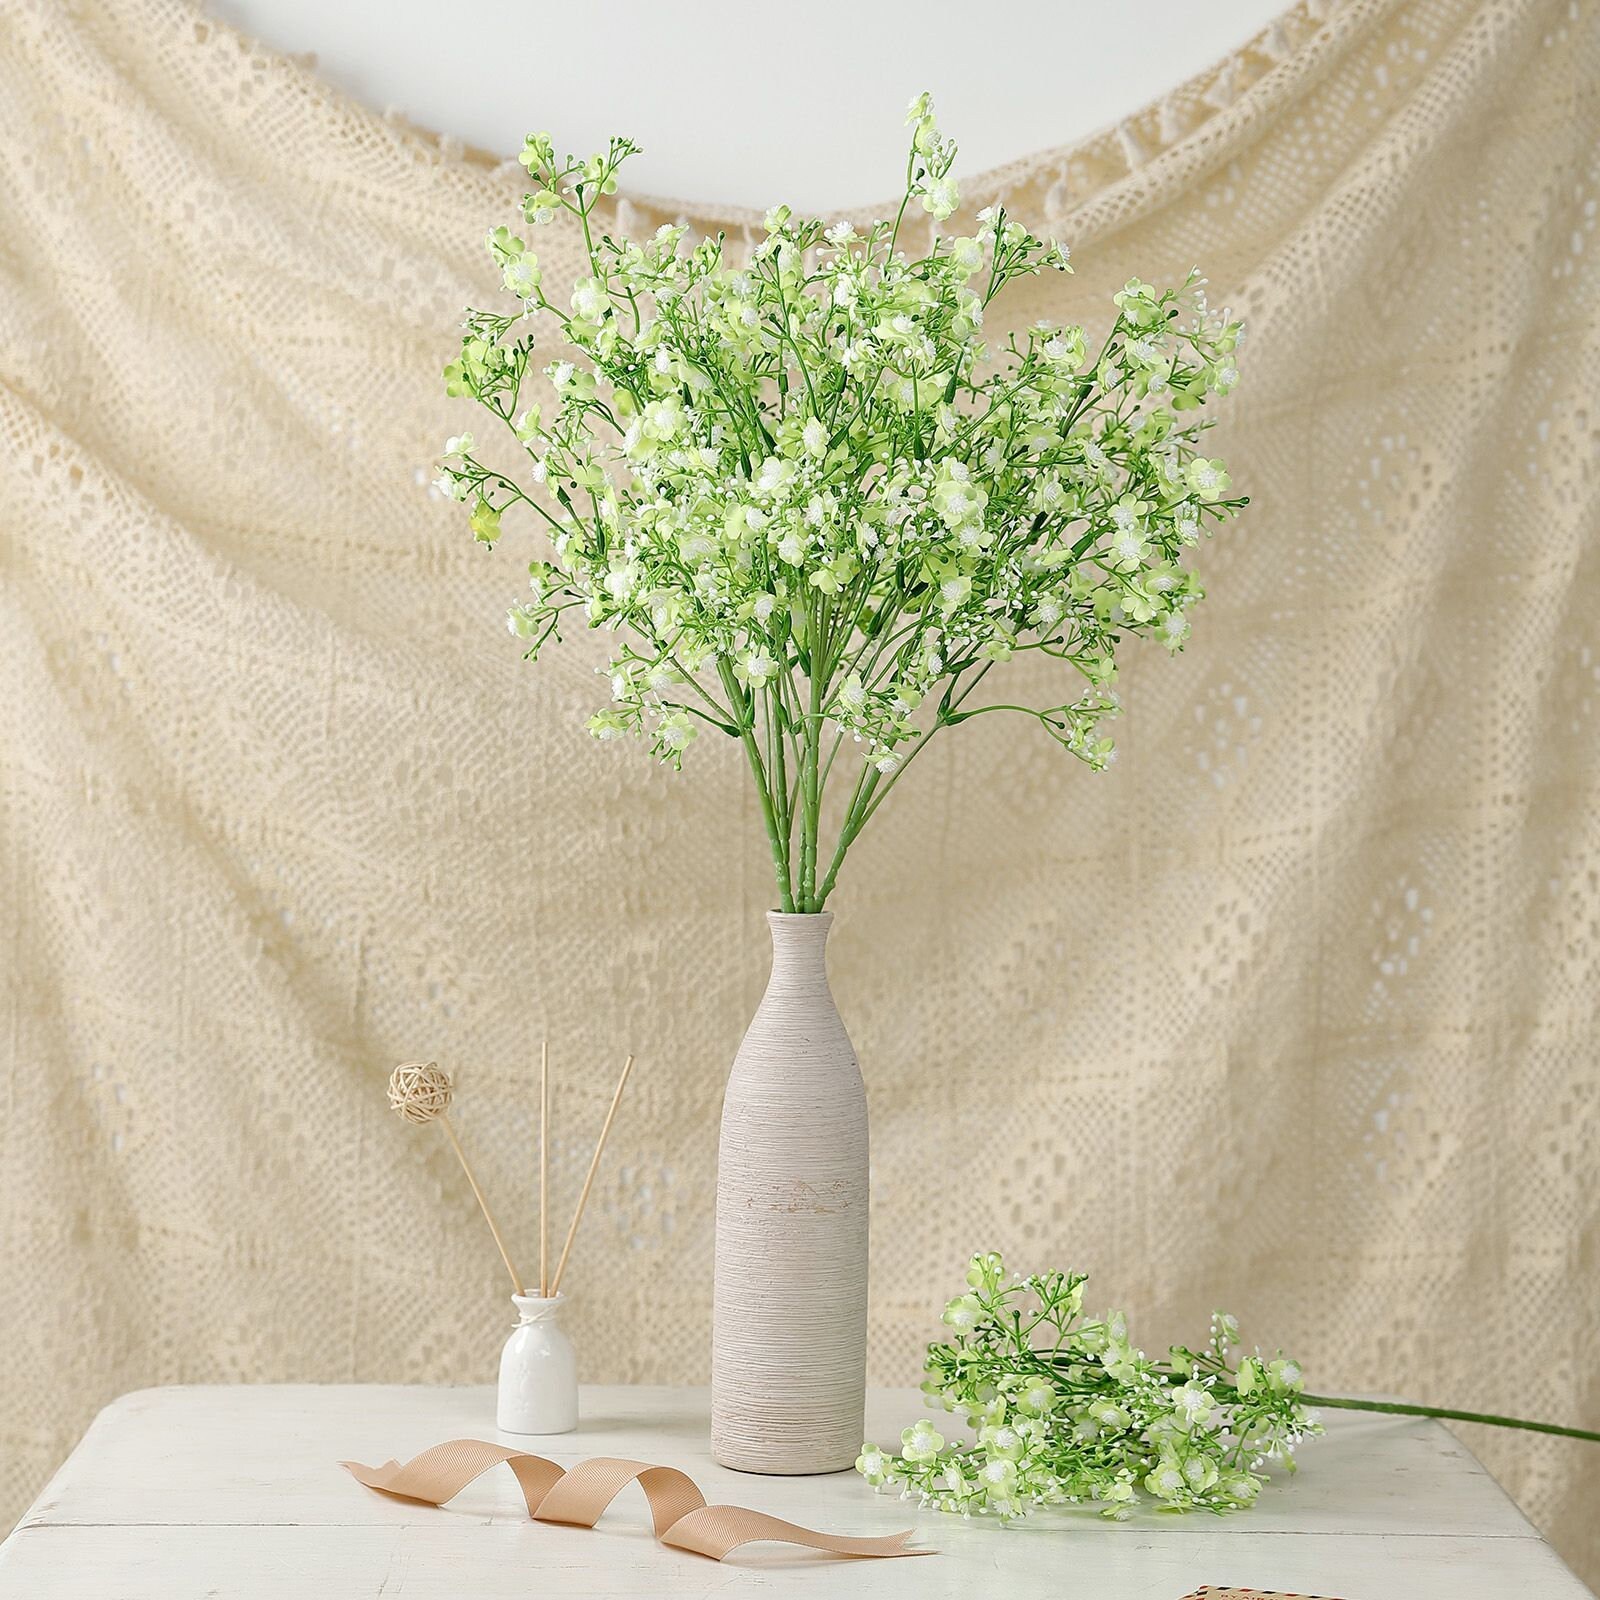 Efavormart 12 bushes BABY BREATH Artificial FILLER FLOWERS for DIY Wedding  Bouquets Centerpieces Party Home Decoration - White